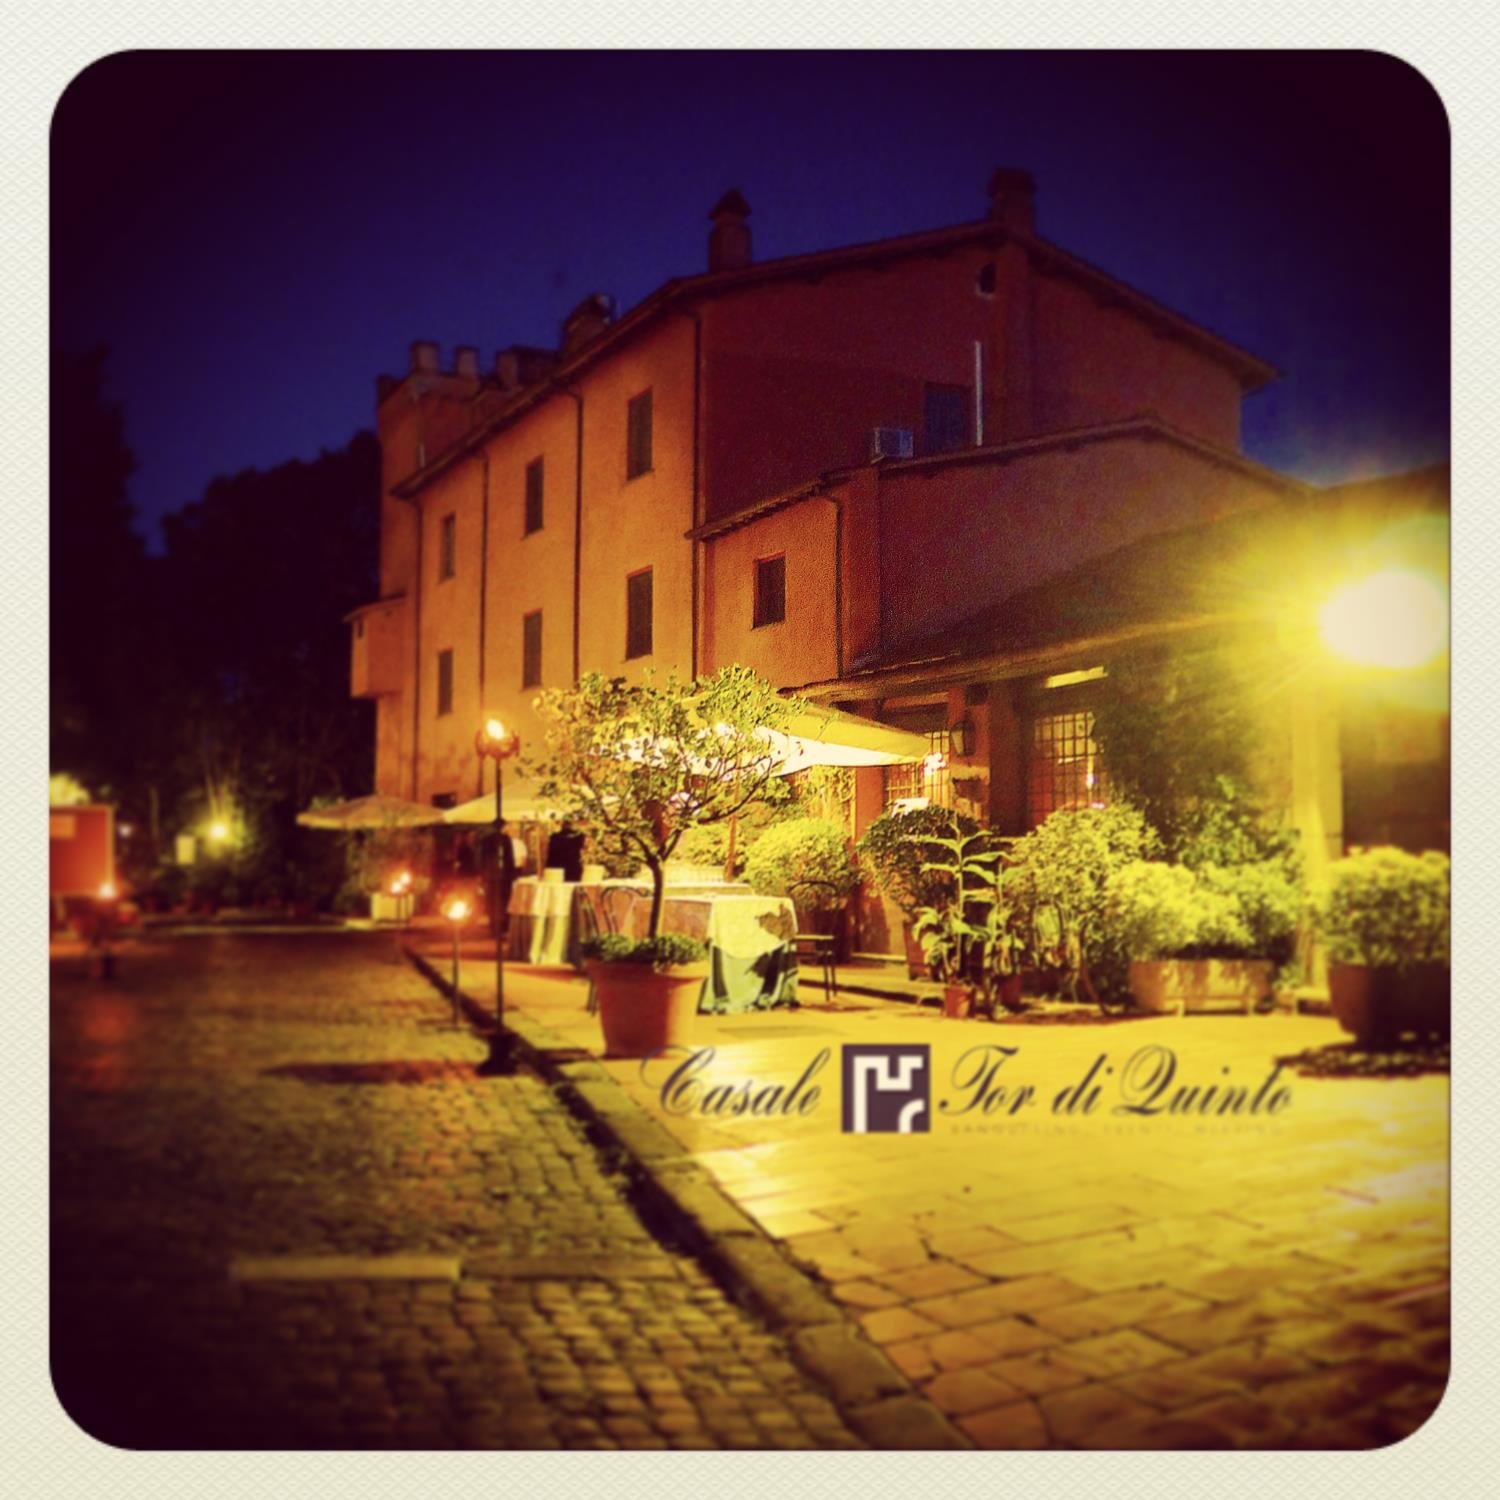 Restaurant and Location 4 all about events in Rome and from all over!! Come to visit Us